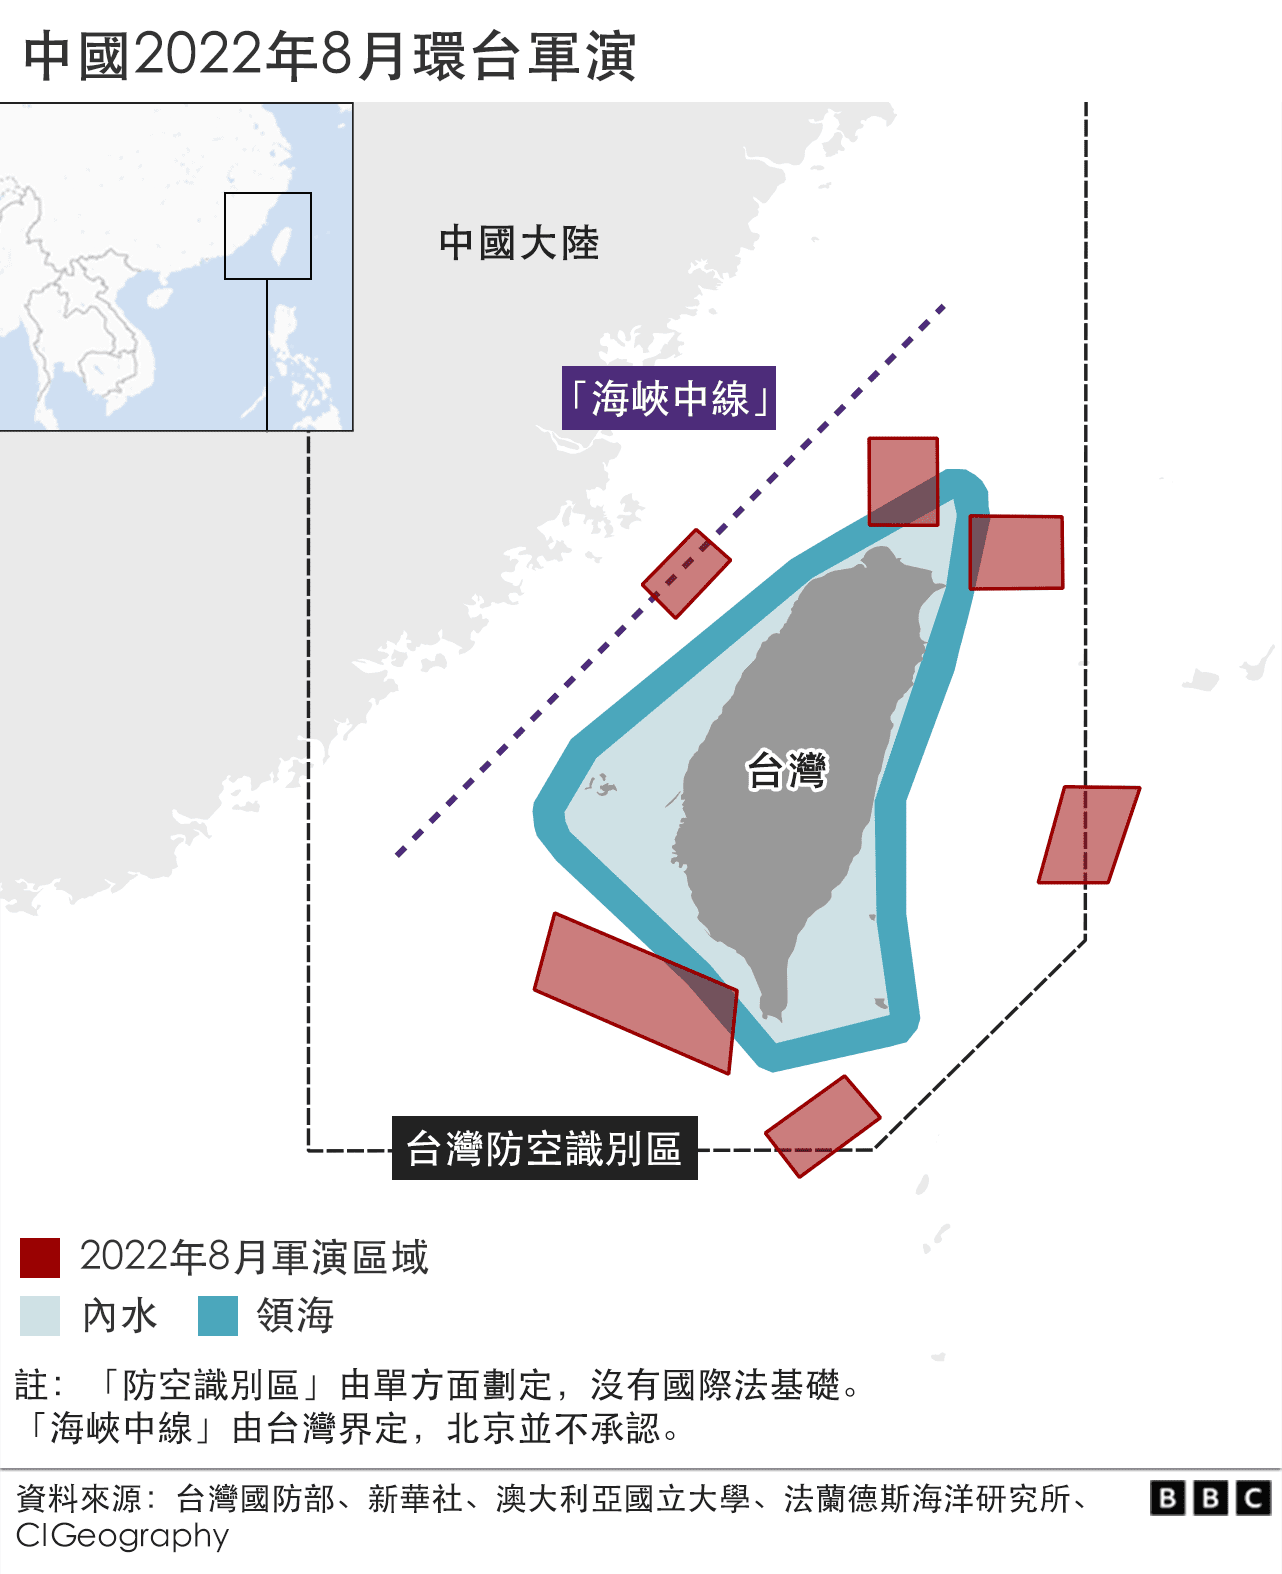 Map: China's August 2022 military exercises around Taiwan